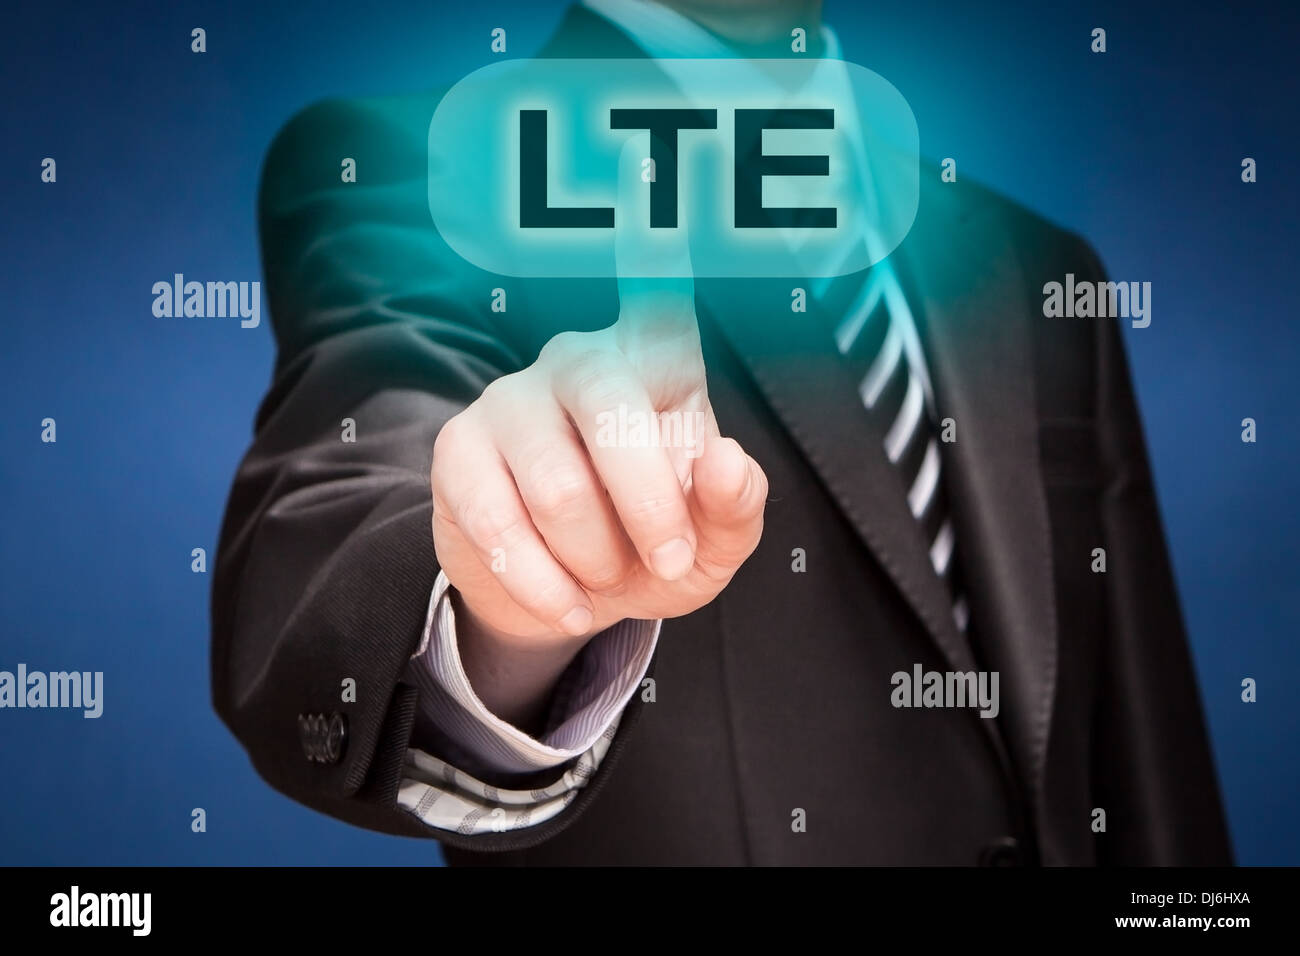 businessman is pushing his finger on lte button Stock Photo